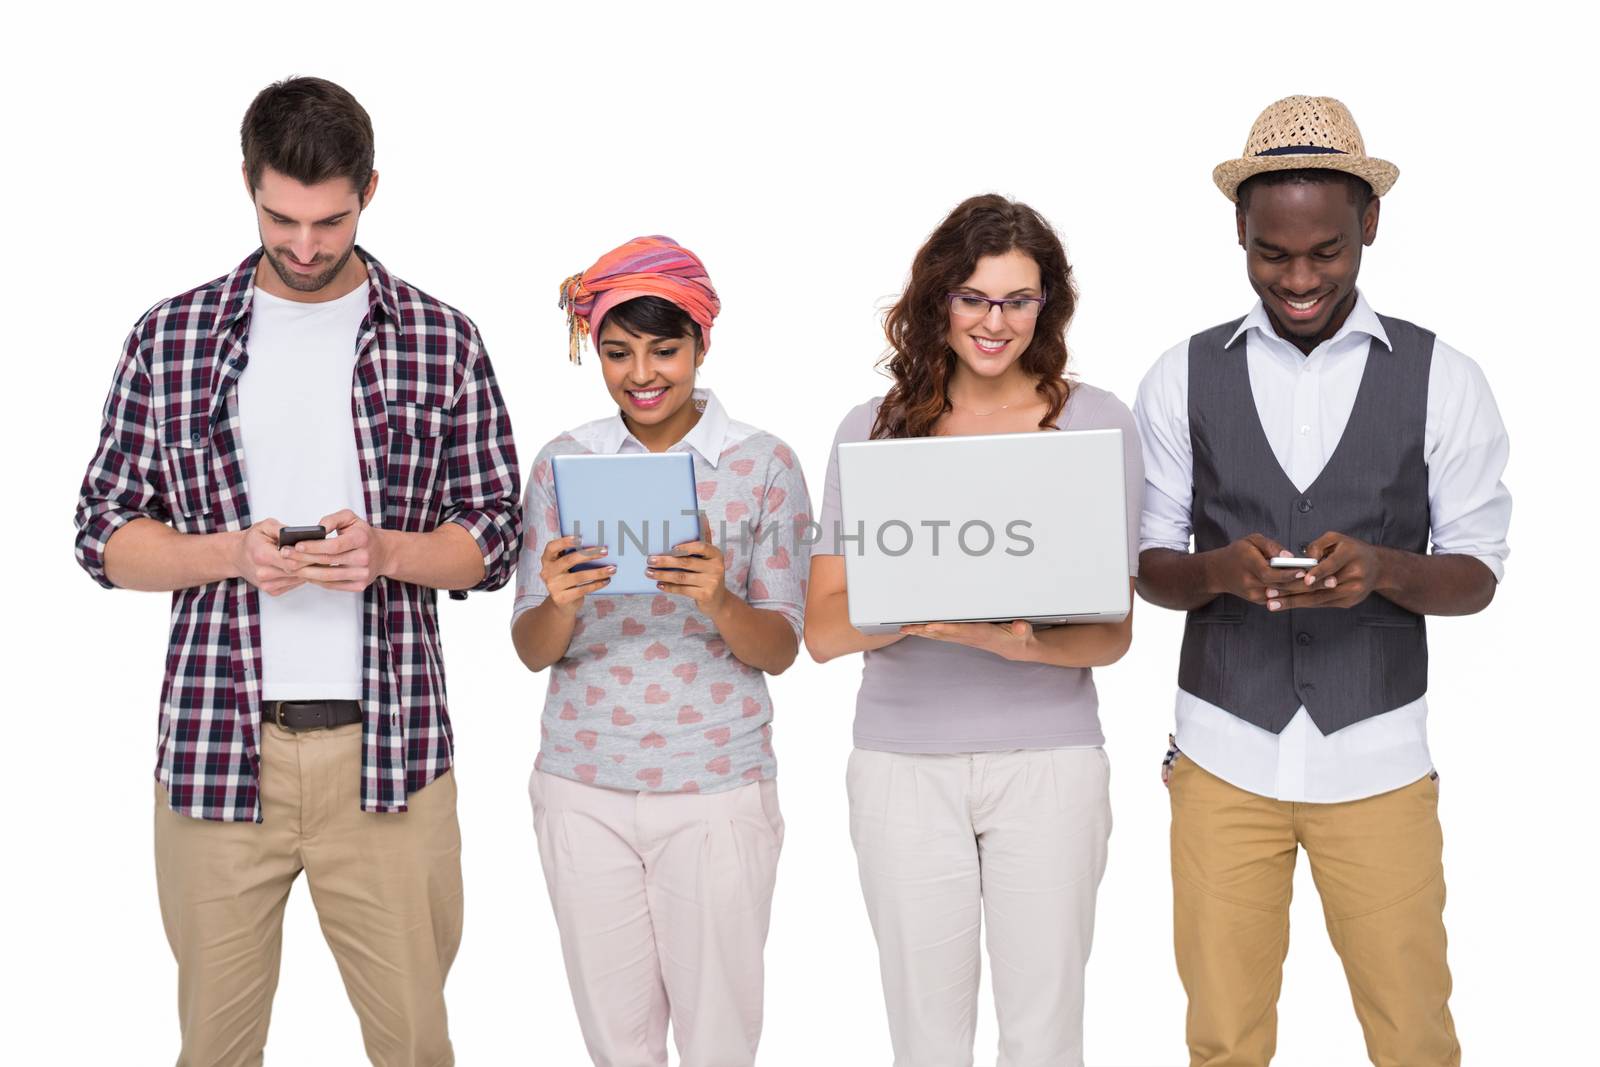 Smiling coworkers standing and using technology on white background